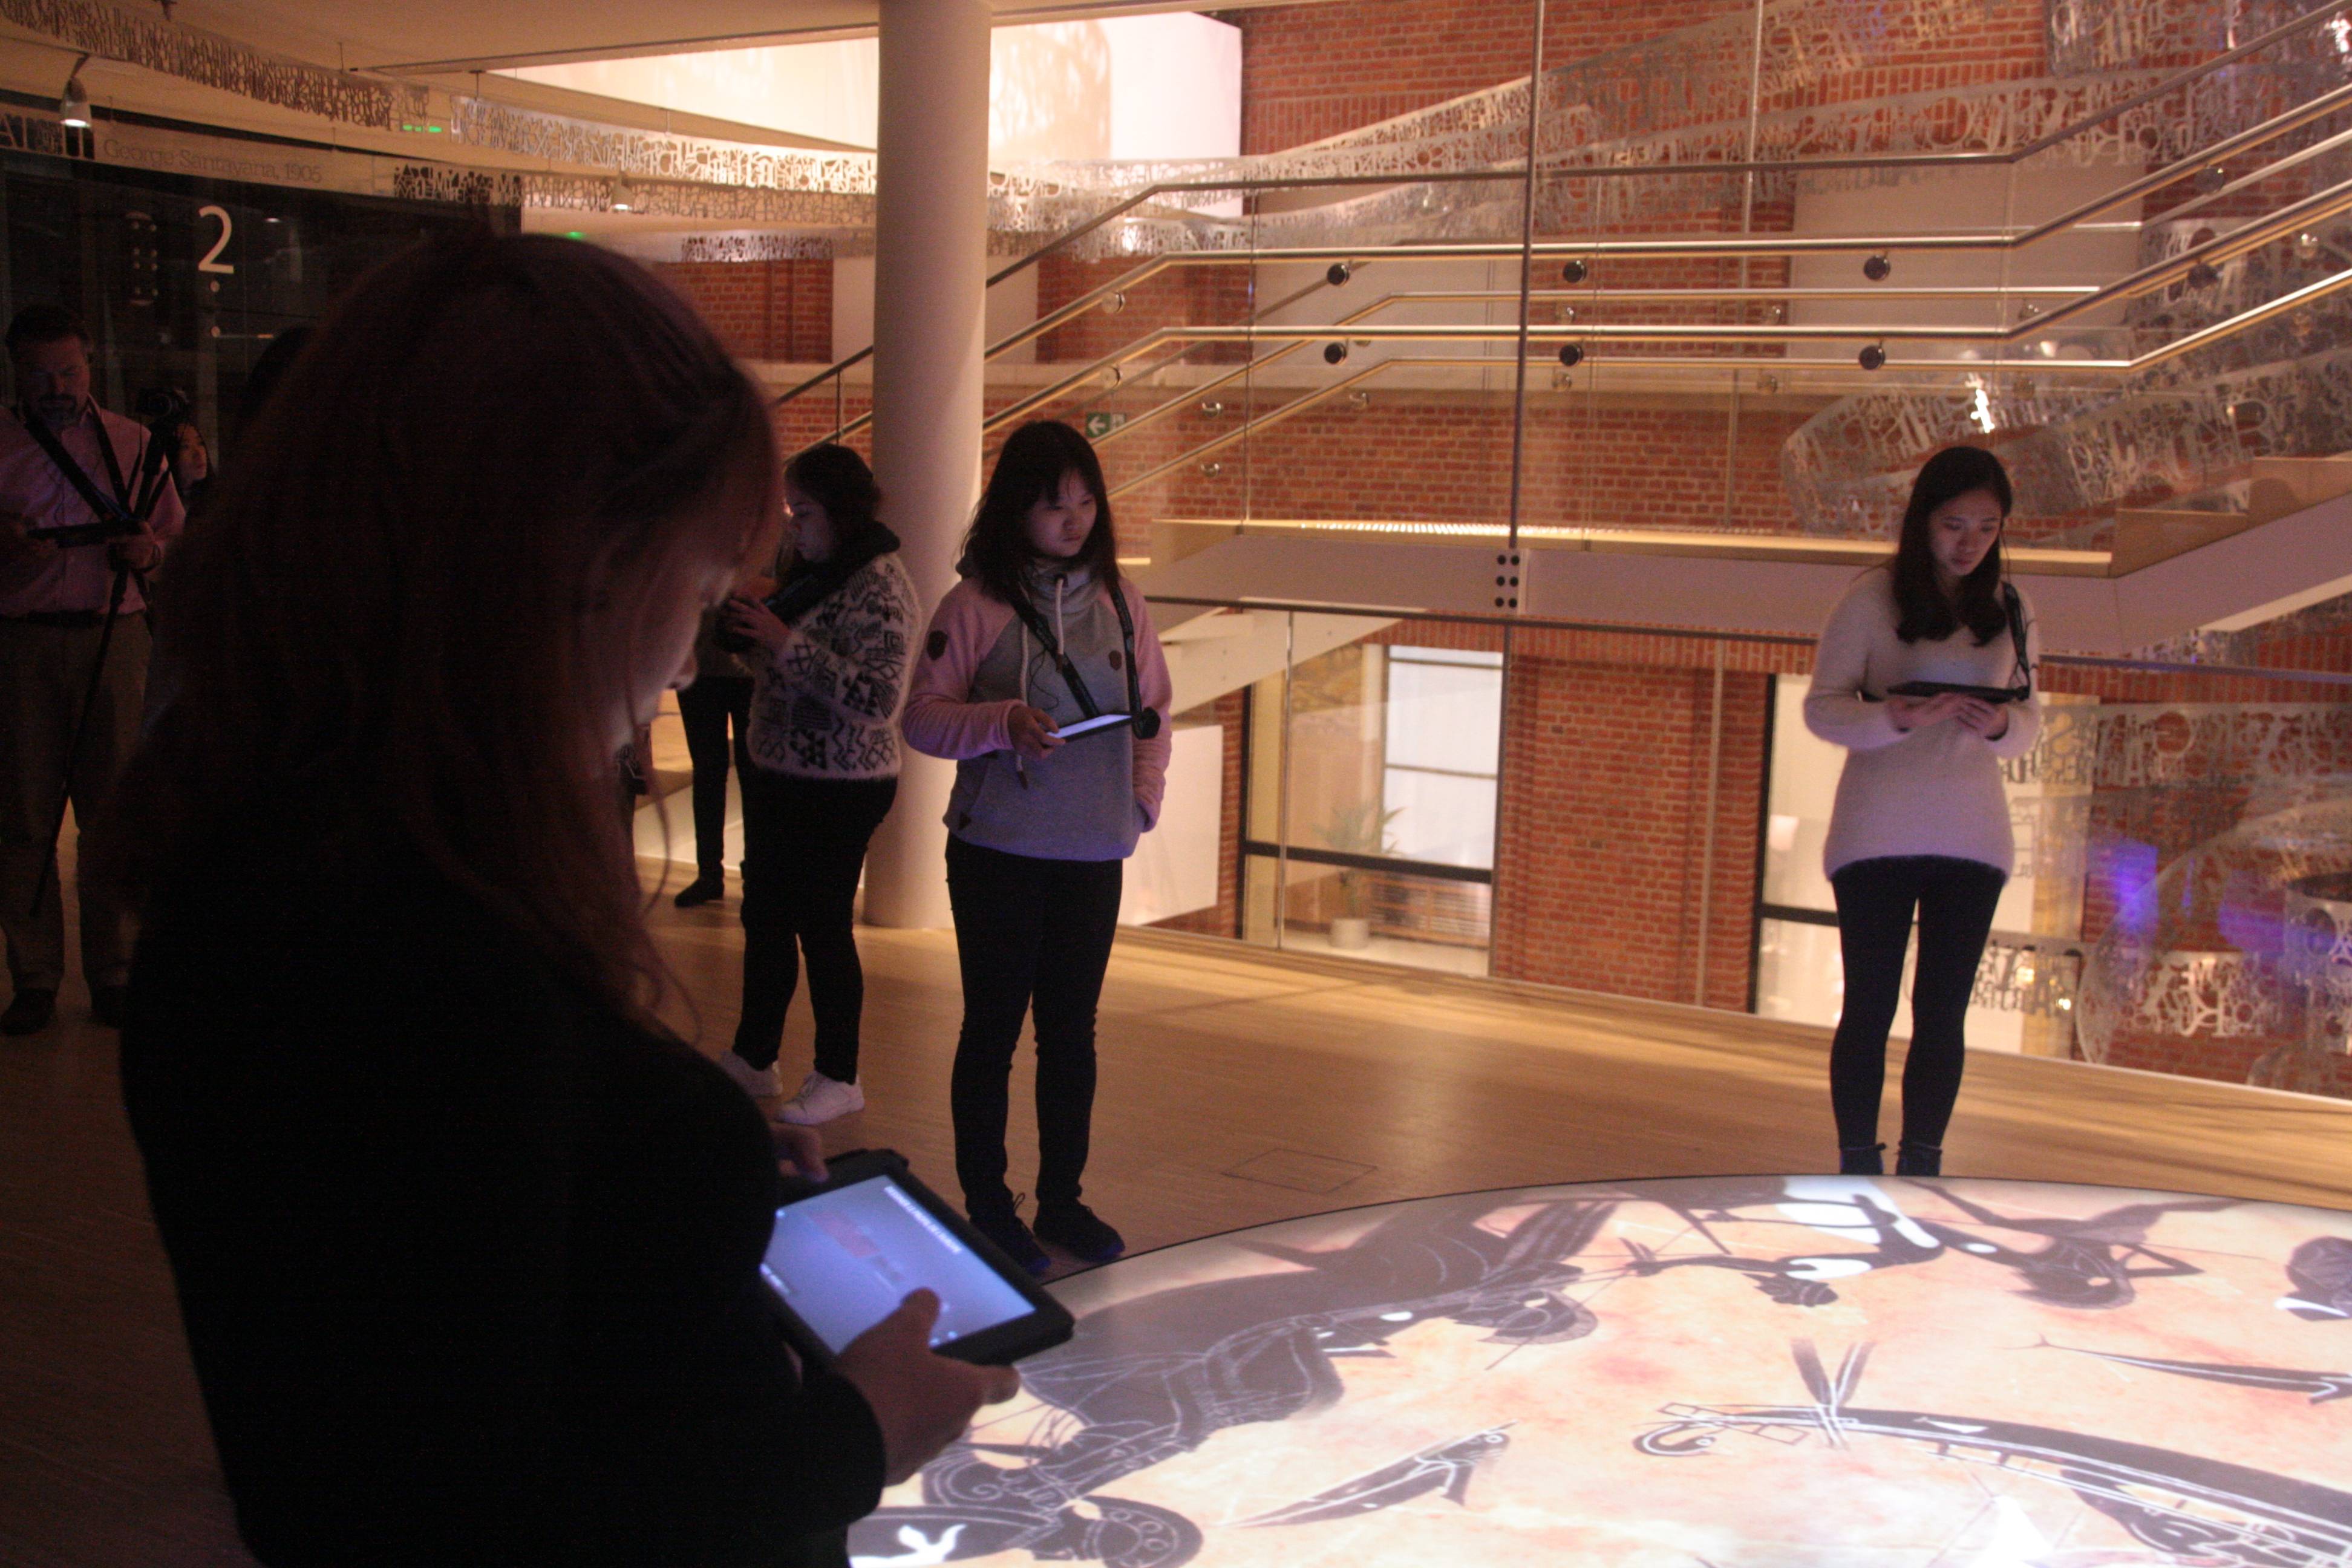 Students looking around in the House of European History